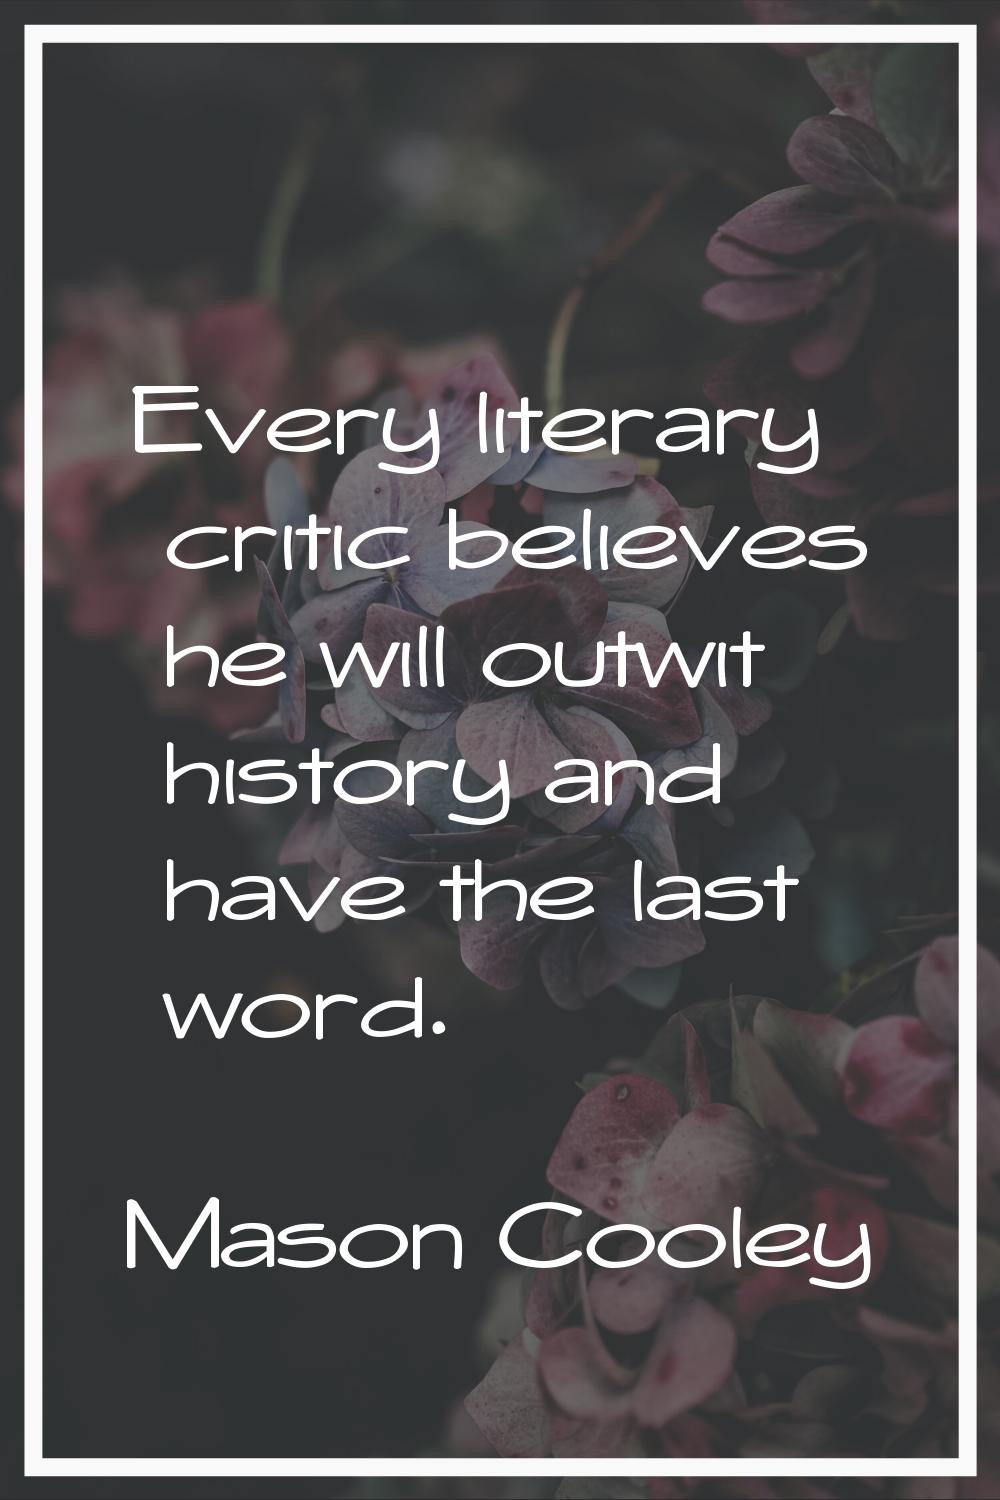 Every literary critic believes he will outwit history and have the last word.